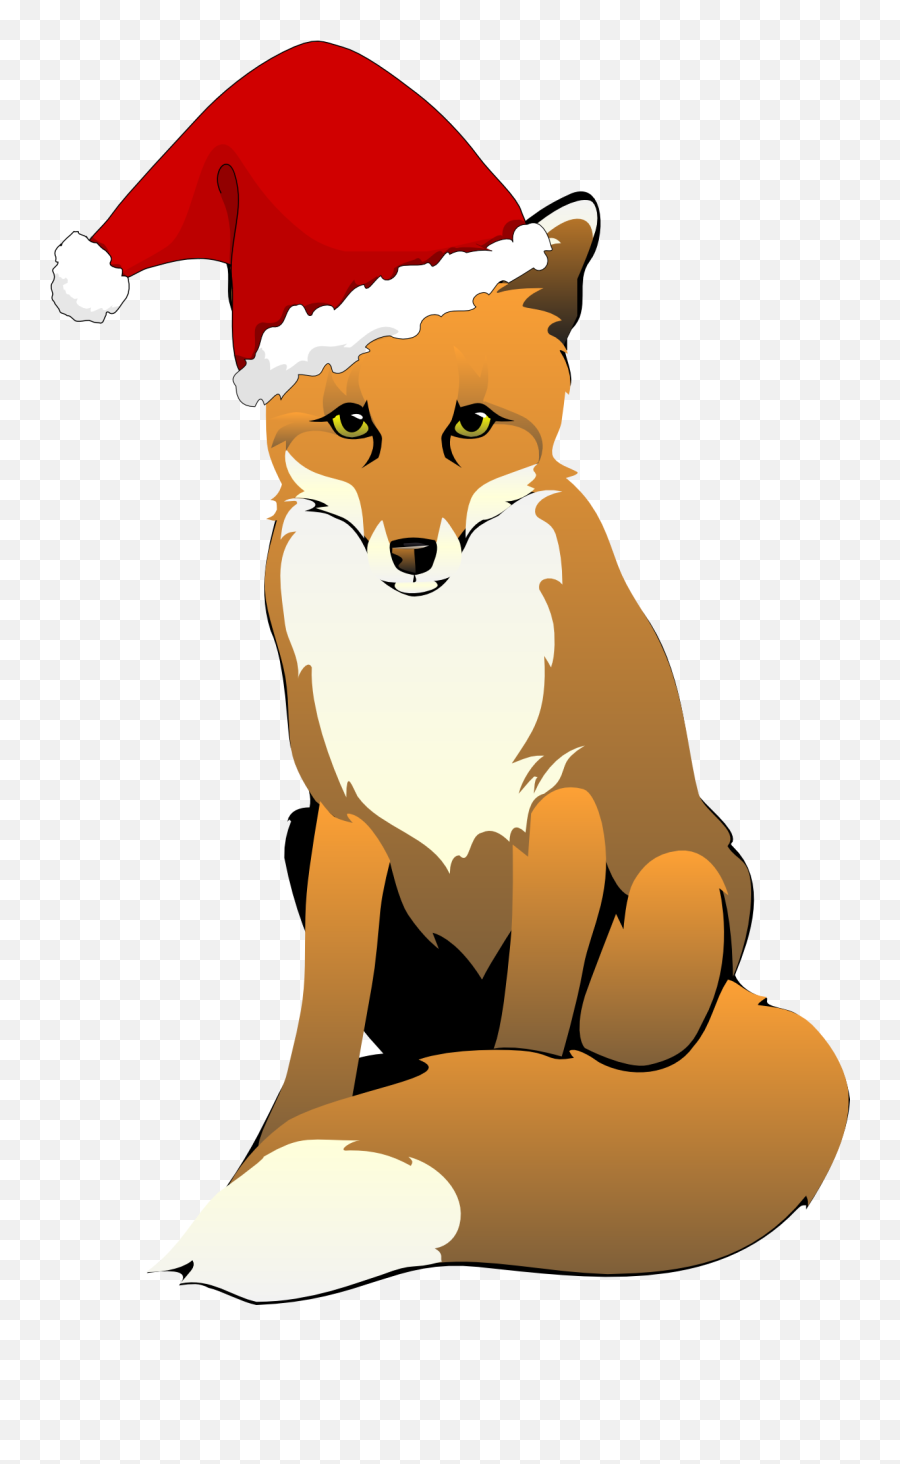 Graphic Image Of A Fox In A Christmas Hat - Fox With Christmas Hats Emoji,Santa Hat Transparent Background